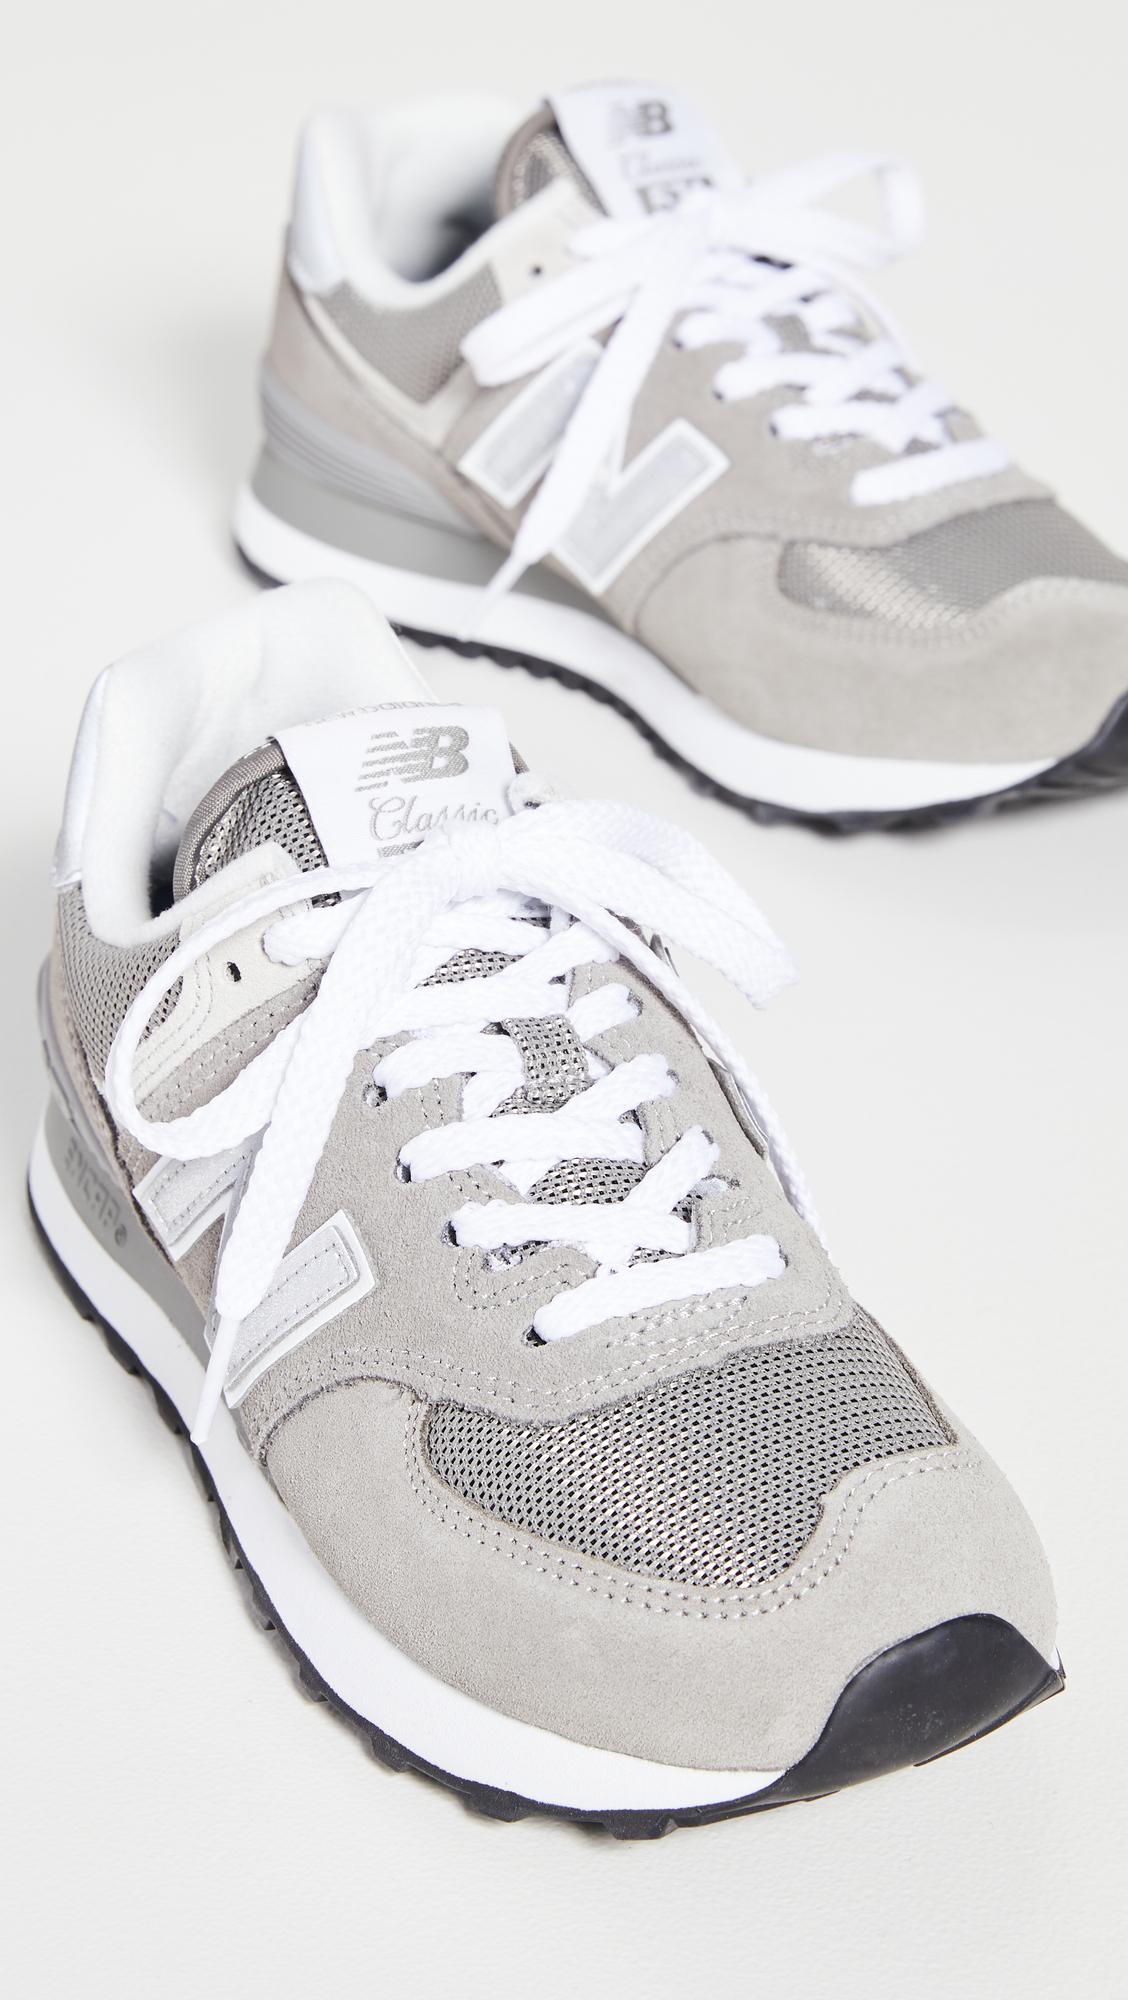 New Balance Leather 574 Iconic Classic Sneakers in Grey (Gray) | Lyst